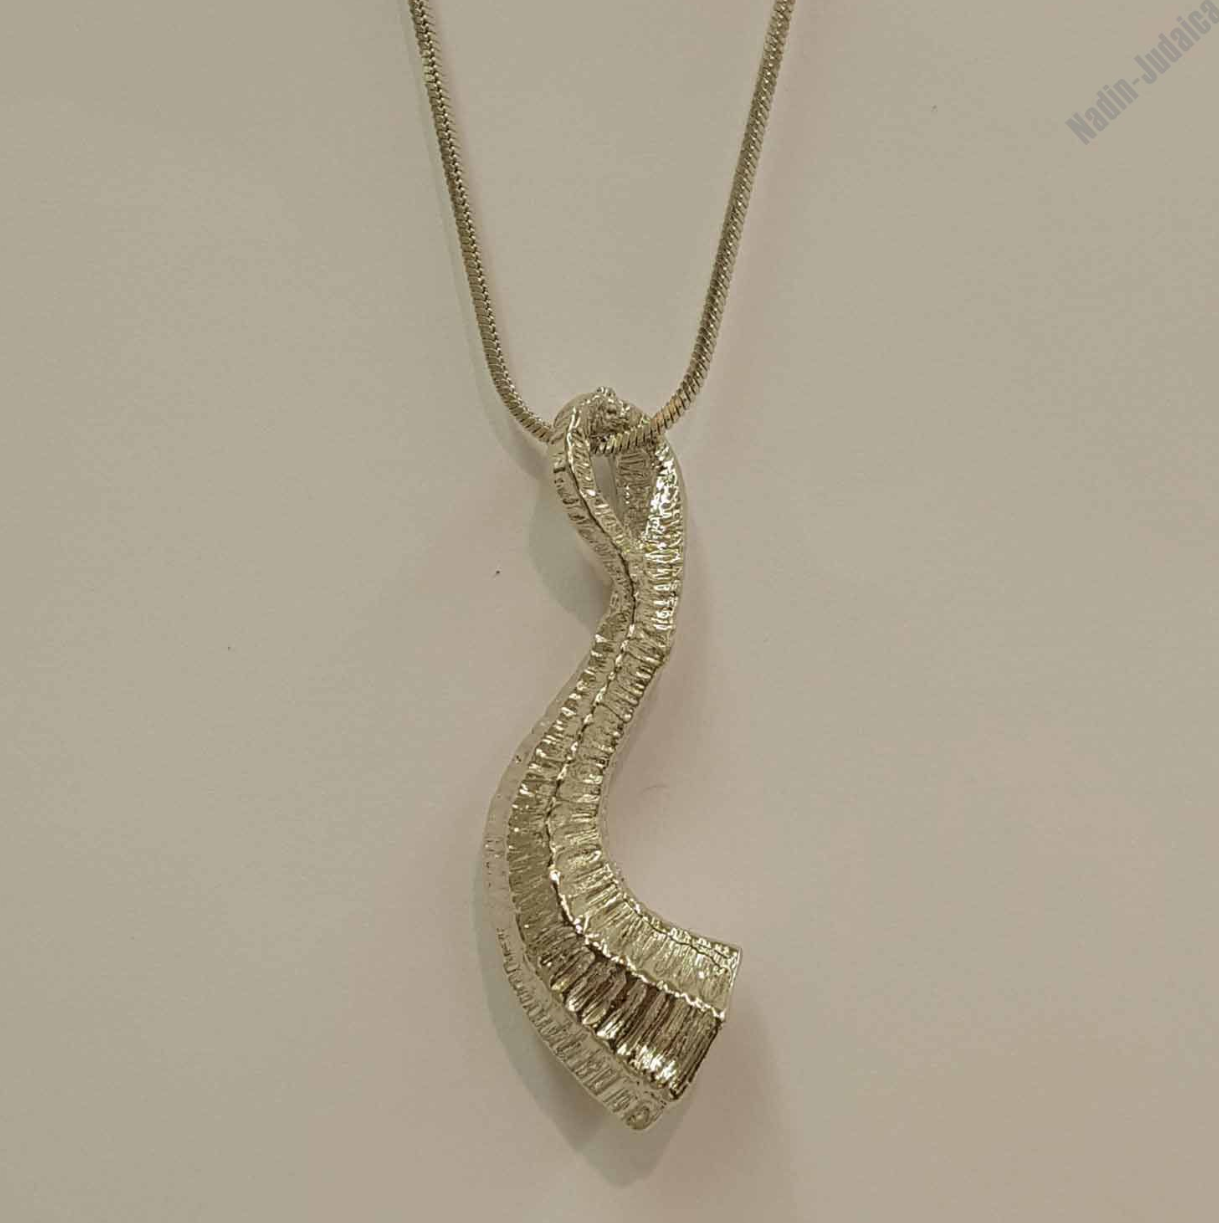 Necklace with Silver-Colored Pendant in Shape of Shofar